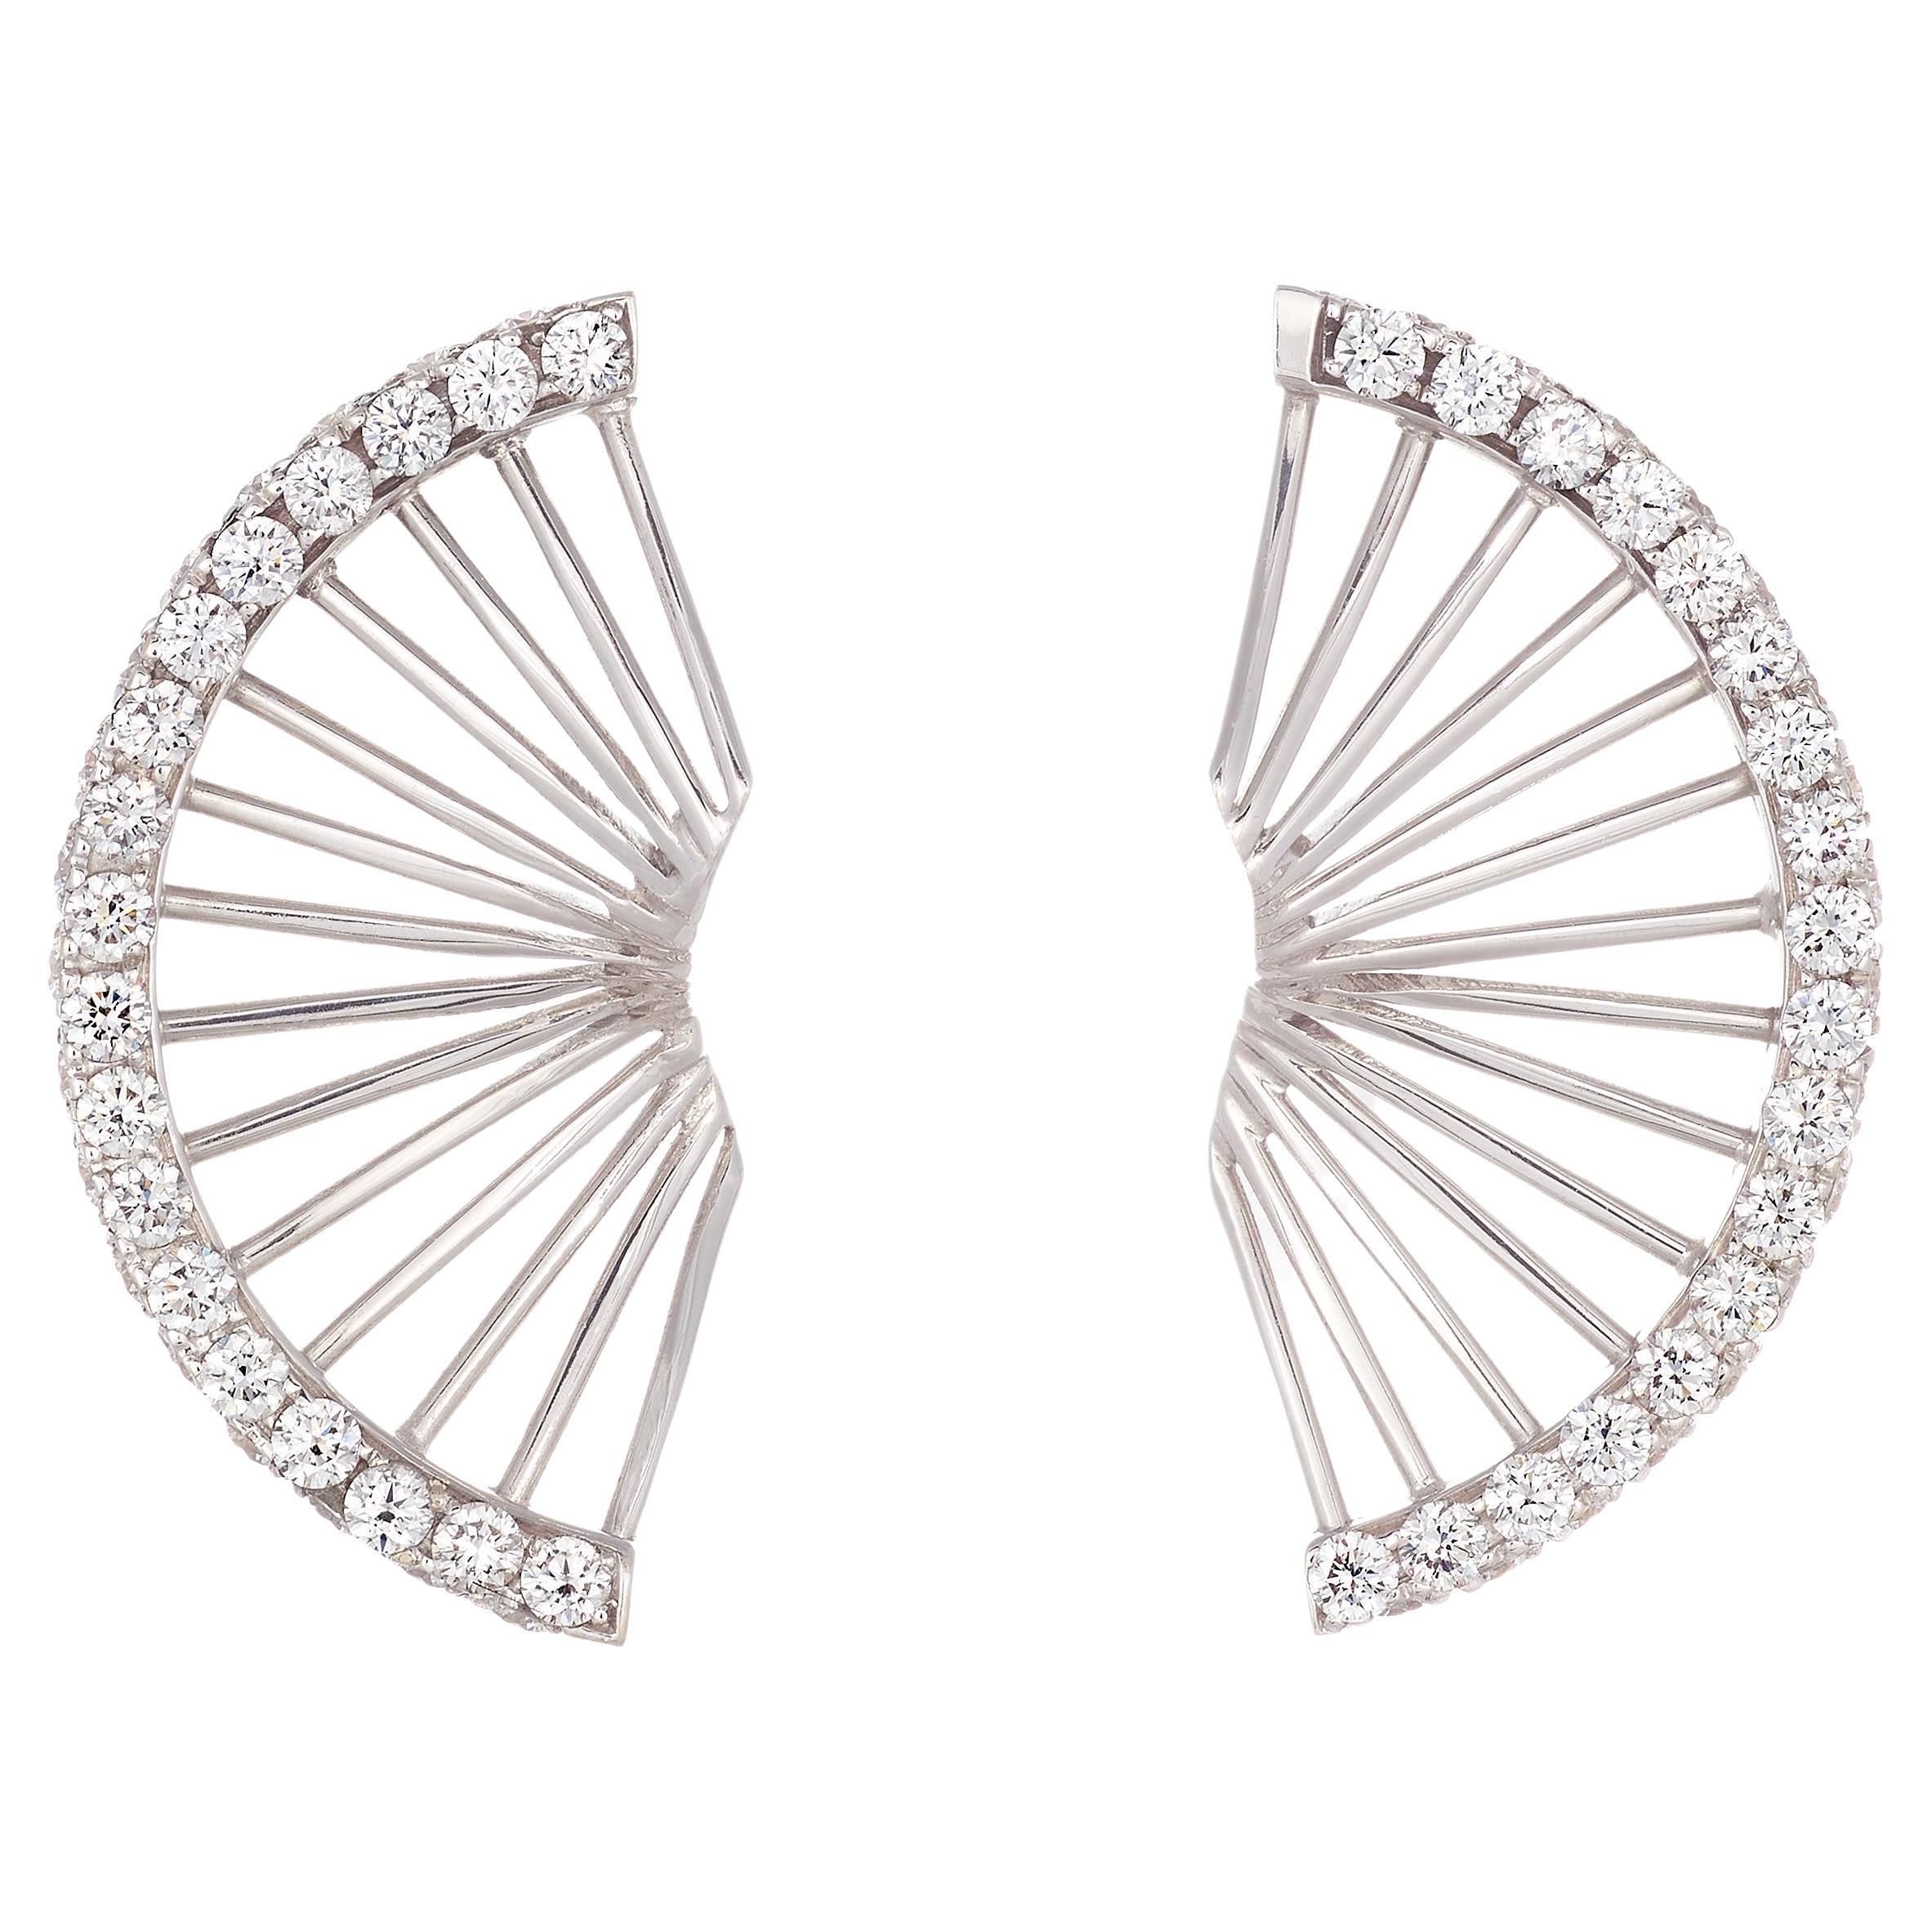 Rosior Contemporary Drop Earrings Set in White Gold with Diamonds